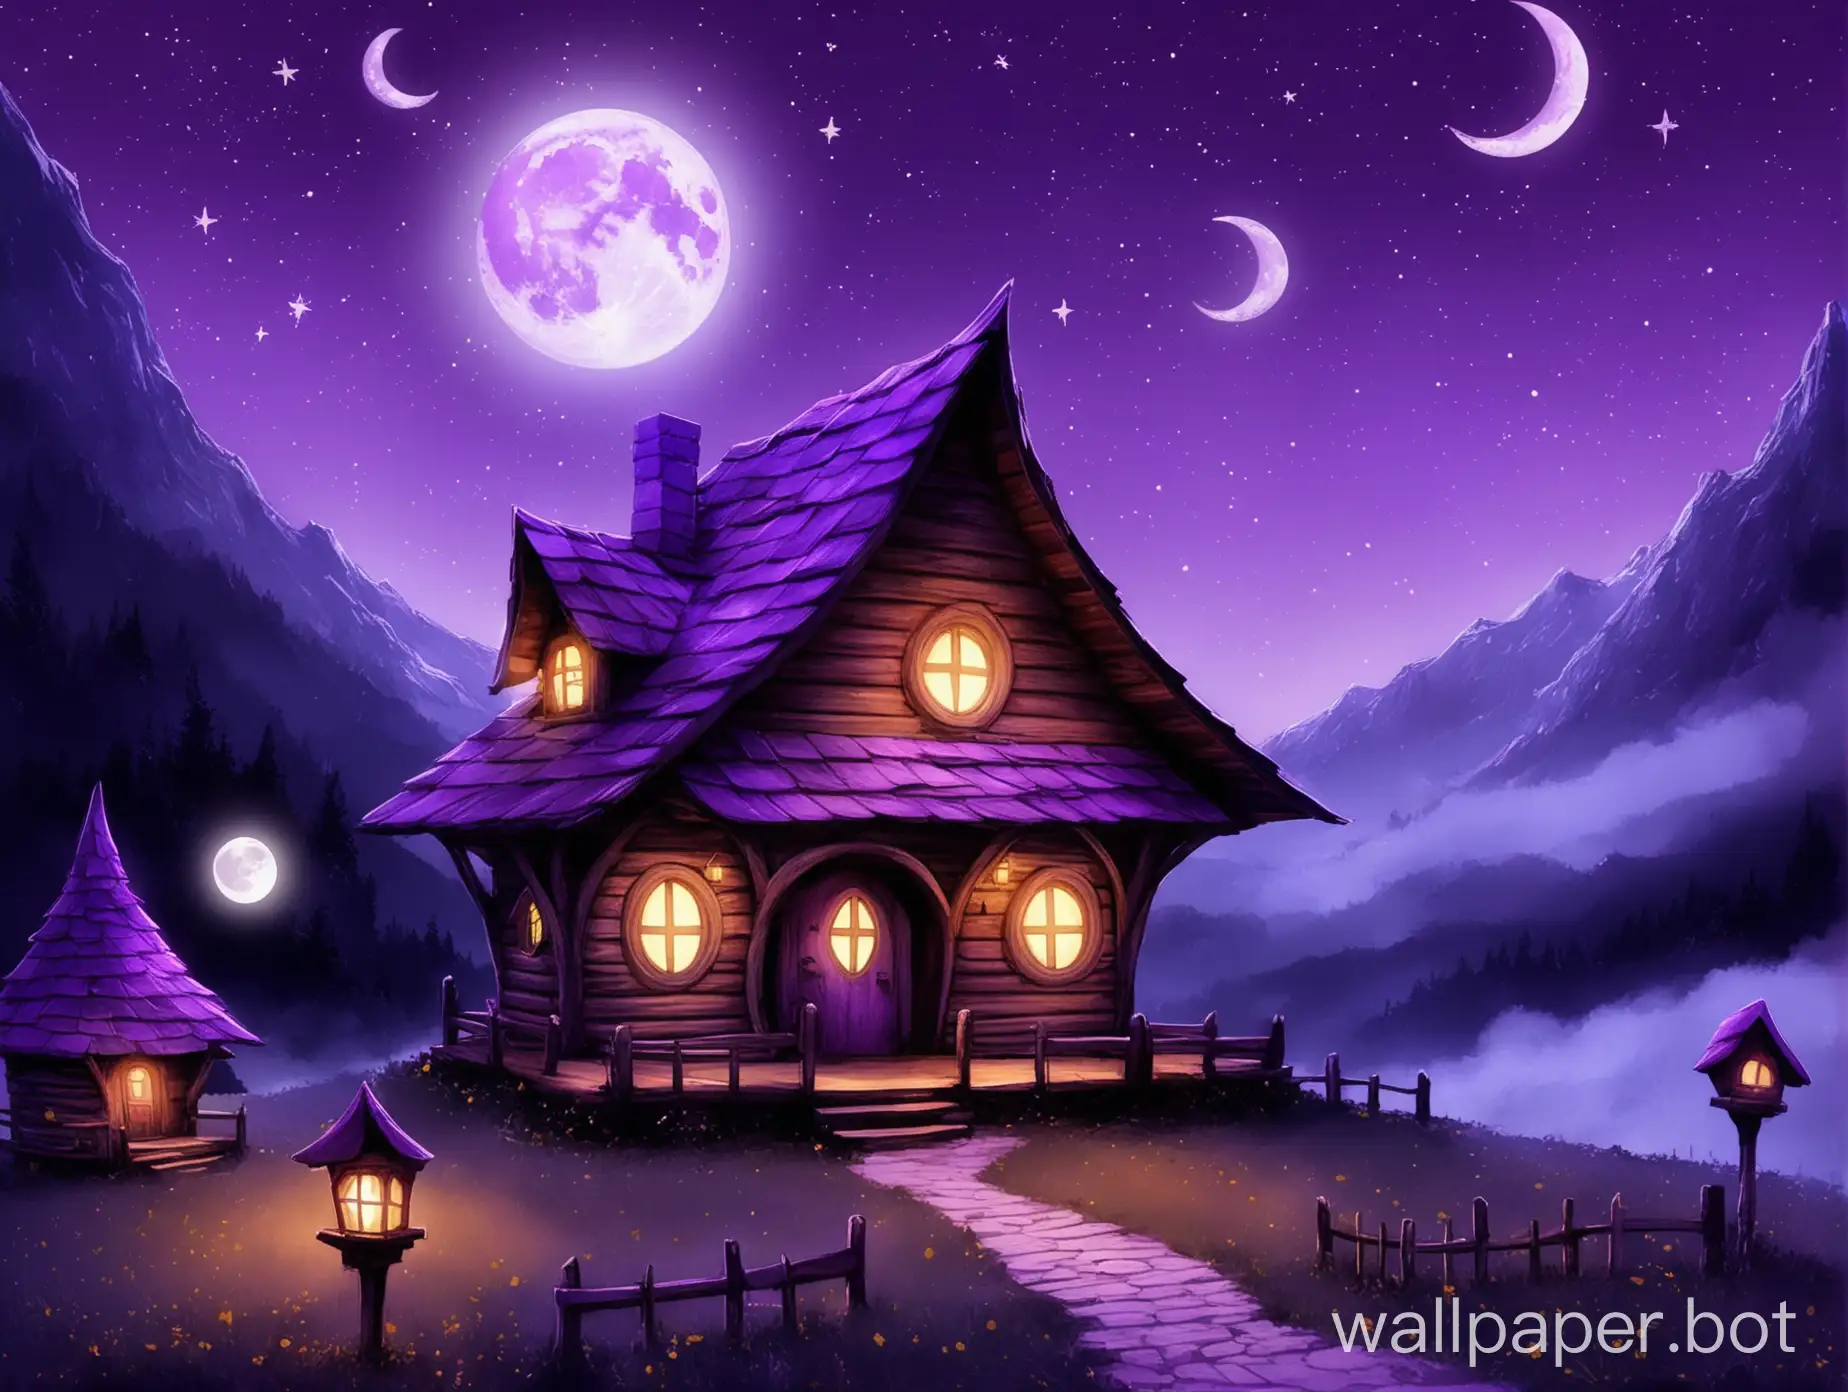 a purple sky witch 3 moons and a little chalet